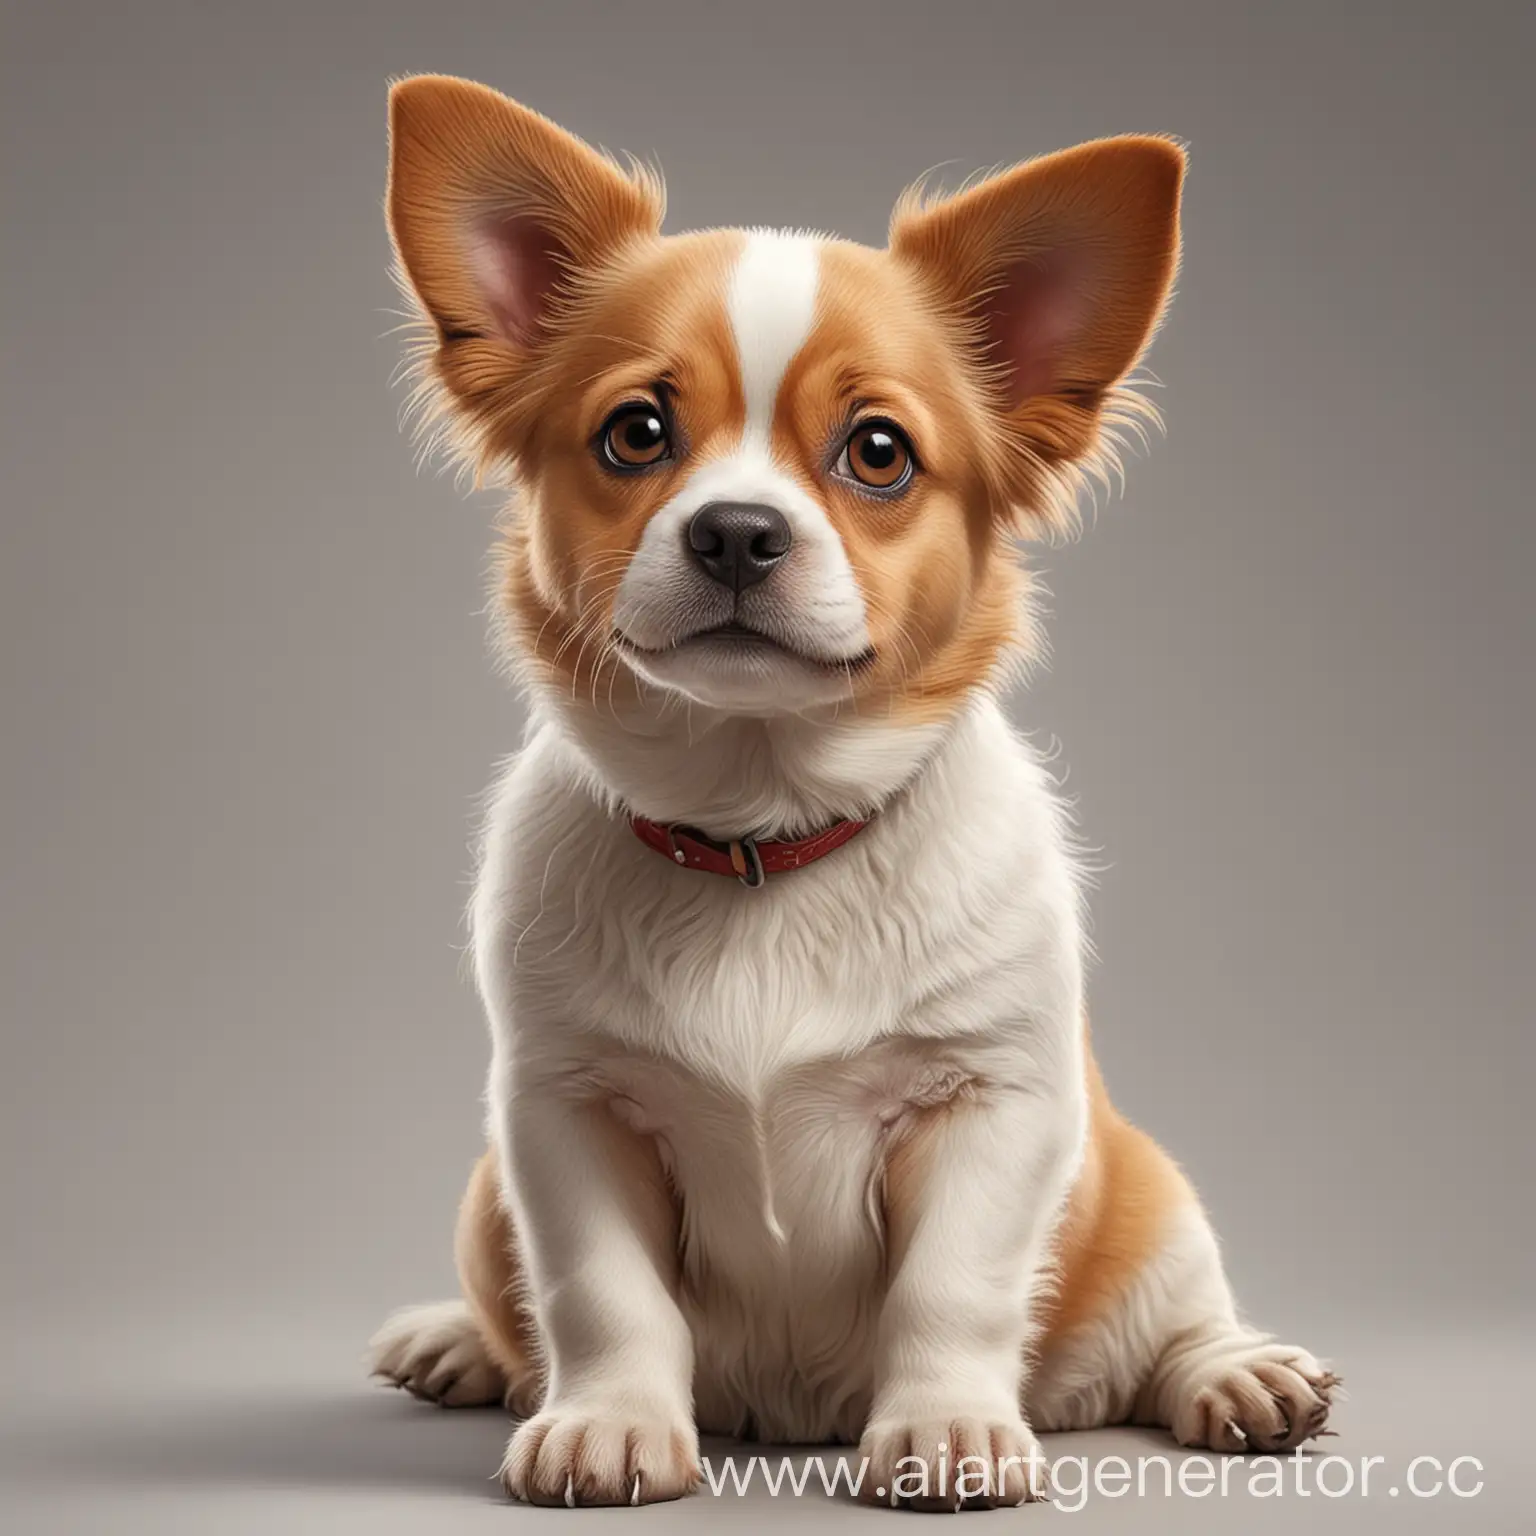 Realistic image of cute one dog who are sitting and looking forward